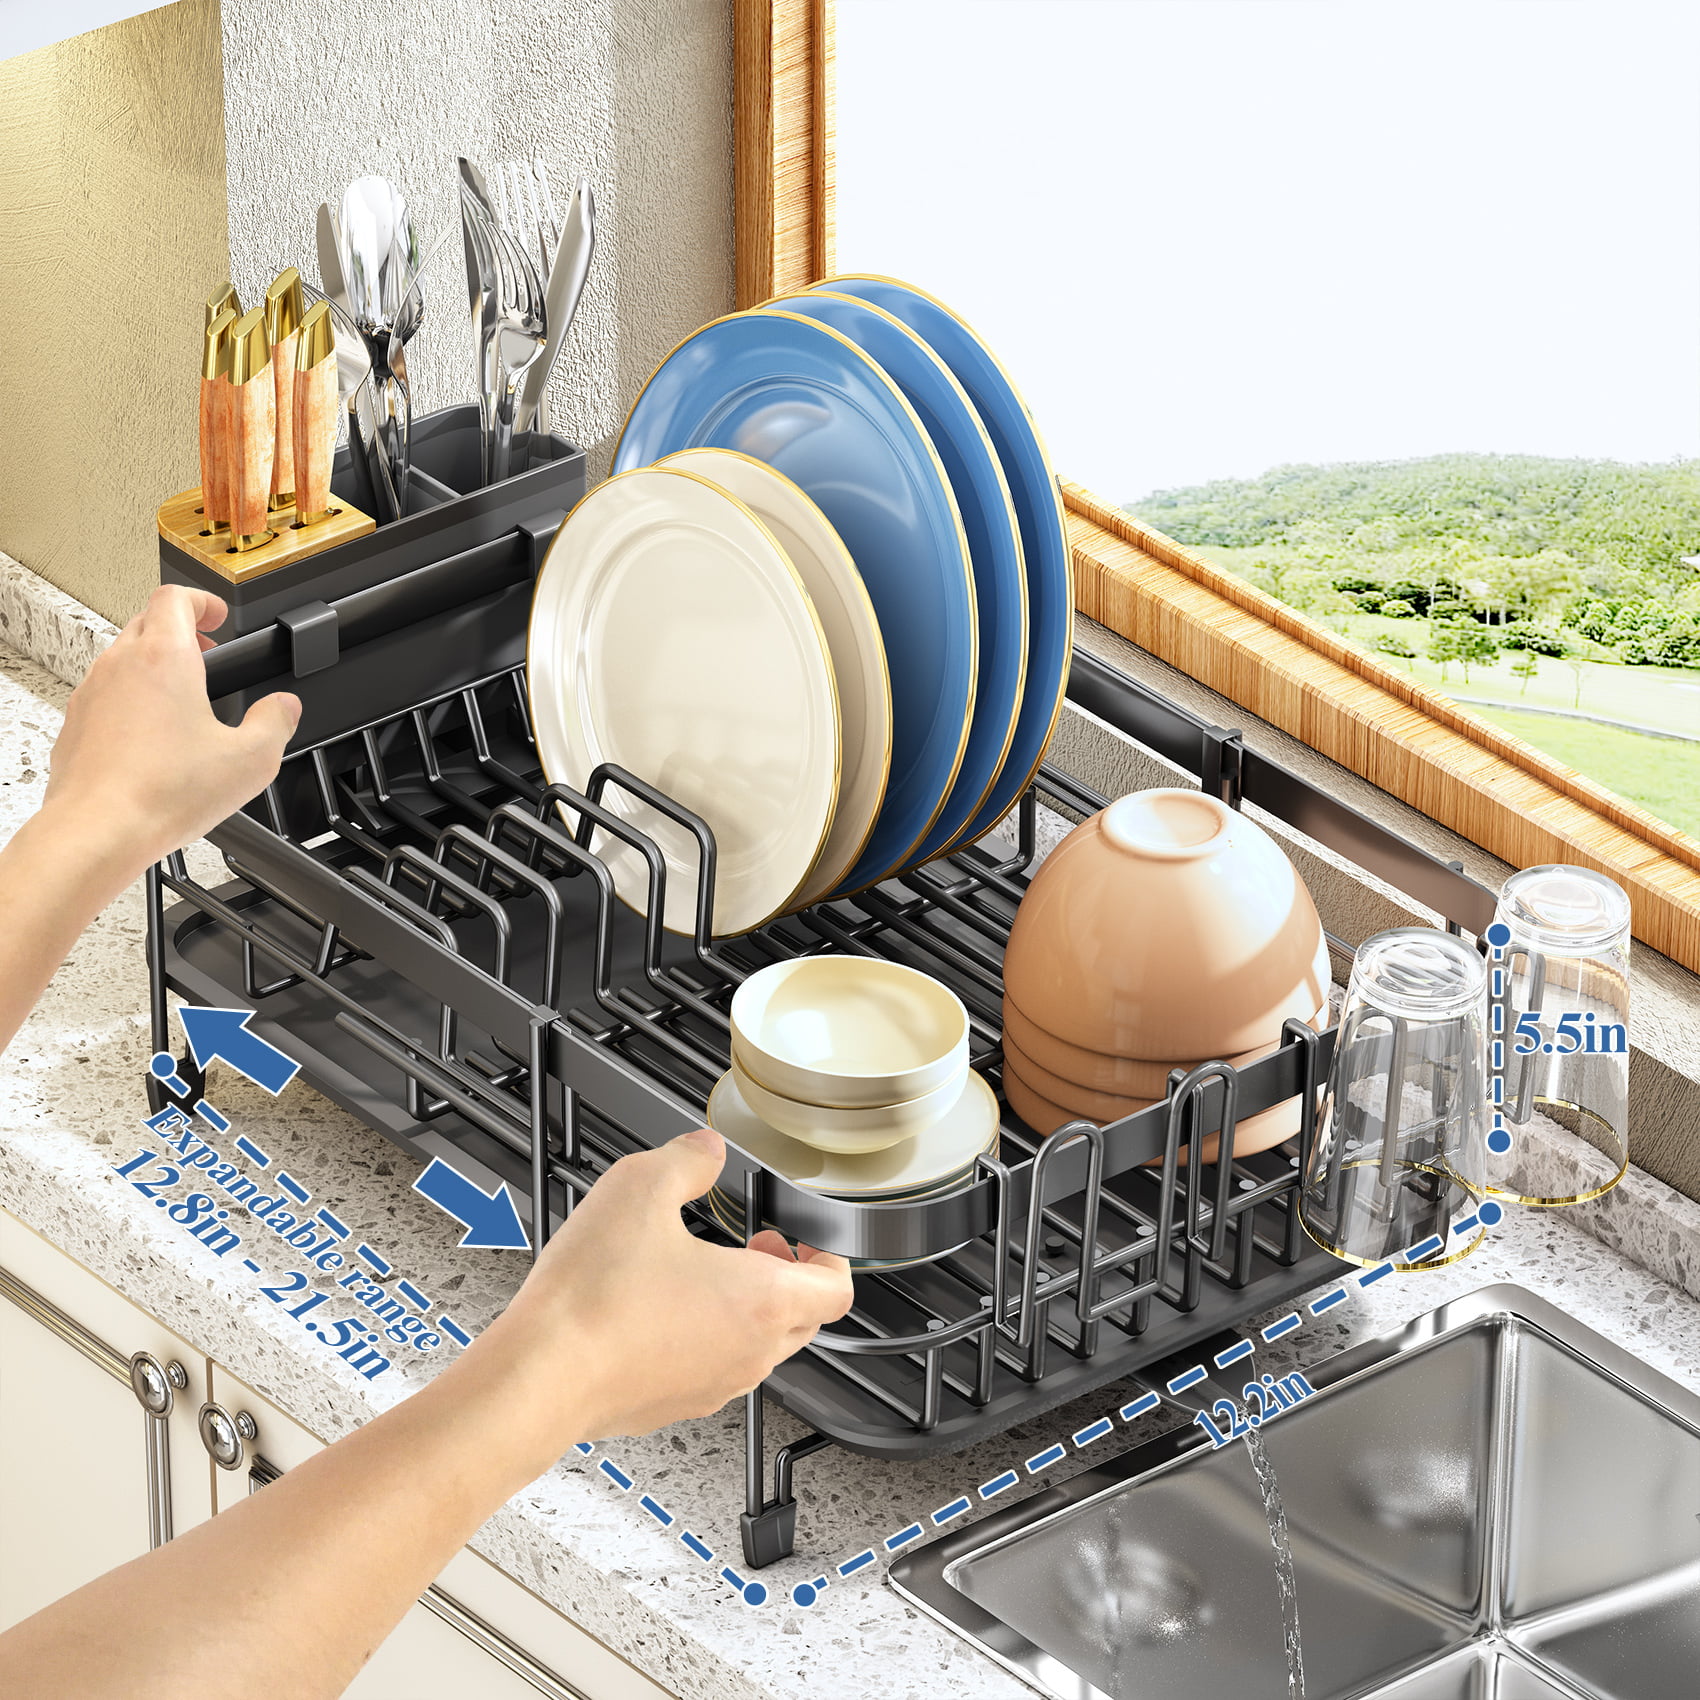 SAYZH Dish Drying Rack, Over The Sink Dish Drying Rack Length Adjustable  (from 338 to 415), 2 Tier Large Dish Rack with cup Holder Ute